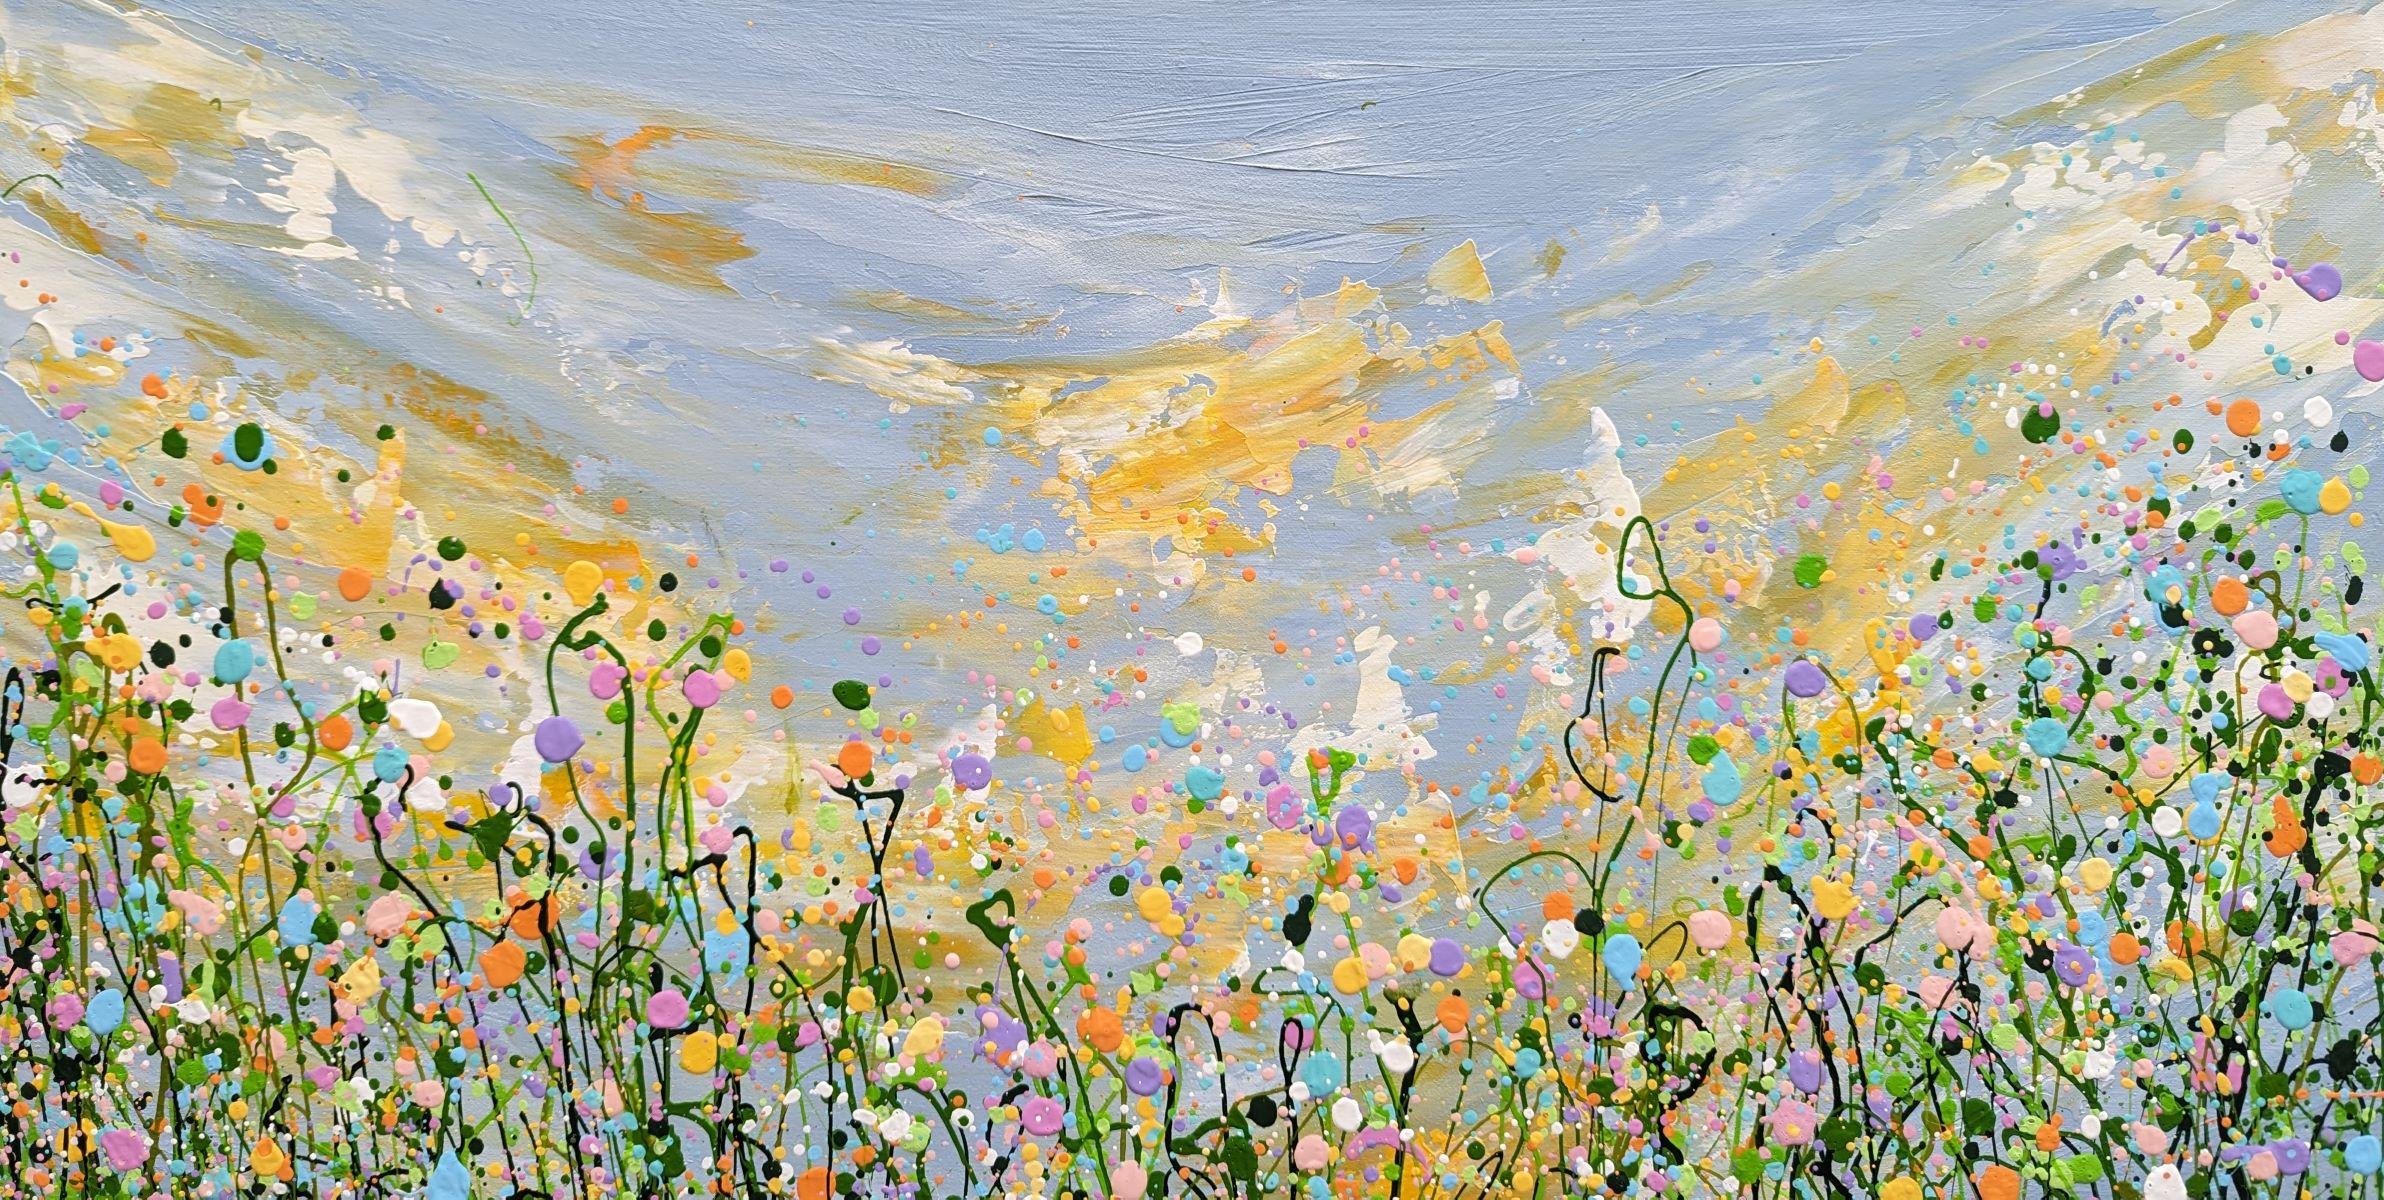 Pastel Spring Dreams - An Original semi-abstract painting by Lucy Moore. Using her signature string grass technique and a colourful palette Lucy has created a semi-abstract twist to her classic meadow paintings, This piece would brighten any home or